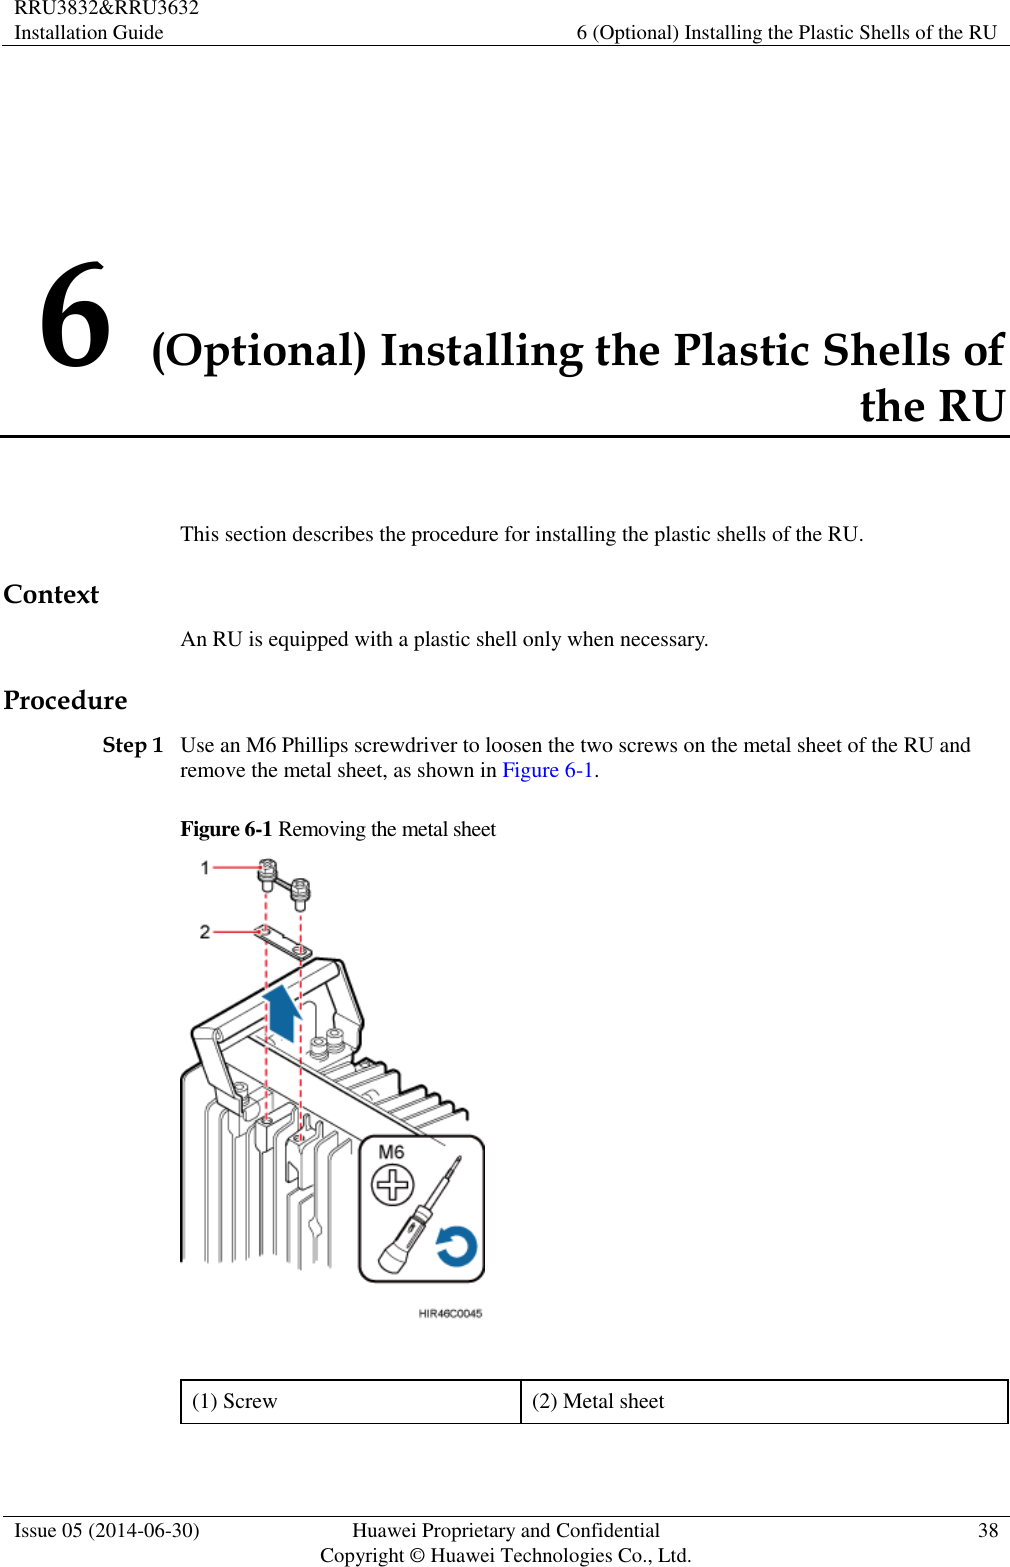 RRU3832&amp;RRU3632 Installation Guide 6 (Optional) Installing the Plastic Shells of the RU  Issue 05 (2014-06-30) Huawei Proprietary and Confidential                                     Copyright © Huawei Technologies Co., Ltd. 38  6 (Optional) Installing the Plastic Shells of the RU This section describes the procedure for installing the plastic shells of the RU. Context An RU is equipped with a plastic shell only when necessary. Procedure Step 1 Use an M6 Phillips screwdriver to loosen the two screws on the metal sheet of the RU and remove the metal sheet, as shown in Figure 6-1. Figure 6-1 Removing the metal sheet   (1) Screw (2) Metal sheet 